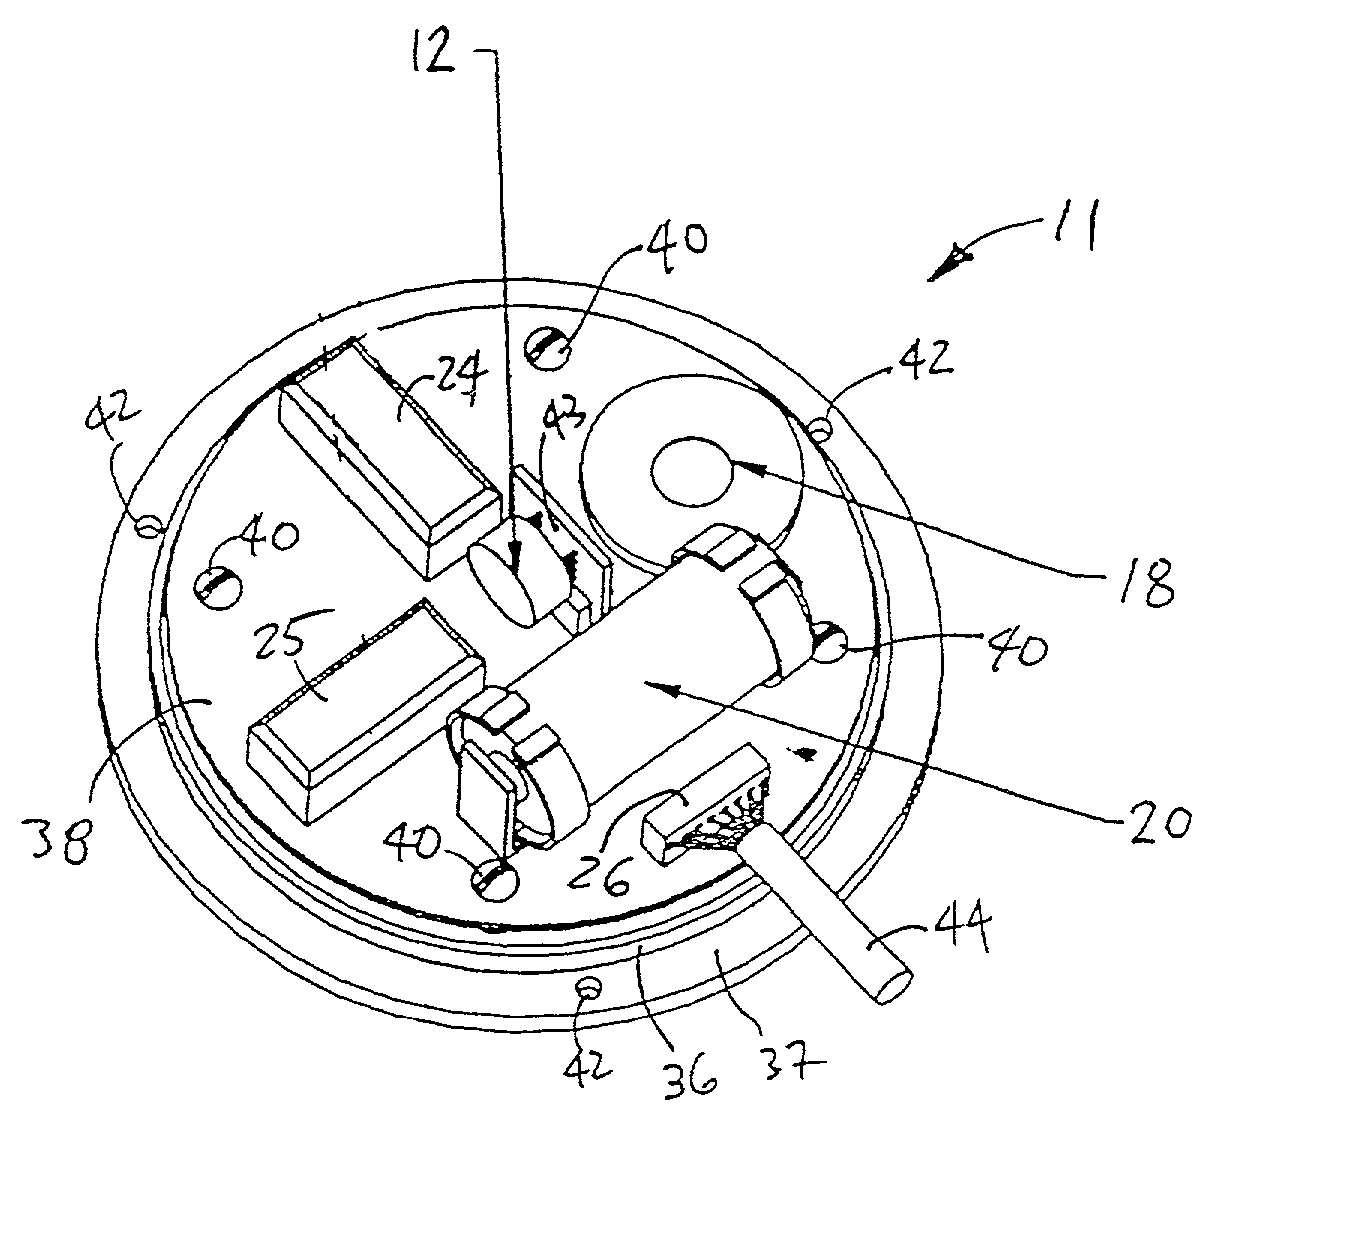 CPR chest compression monitor and method of use